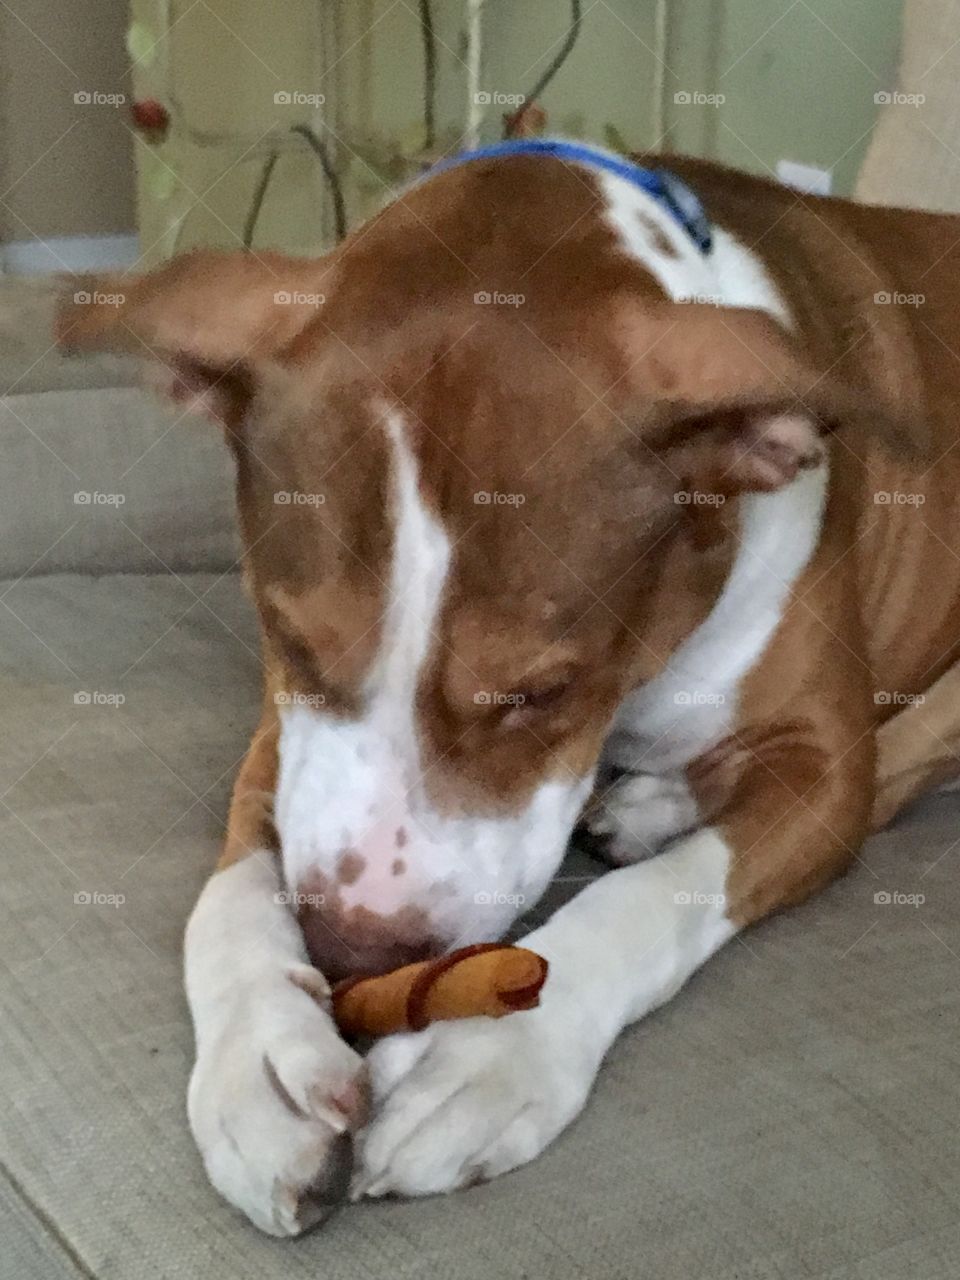 Rescue dog praying before eating his treat